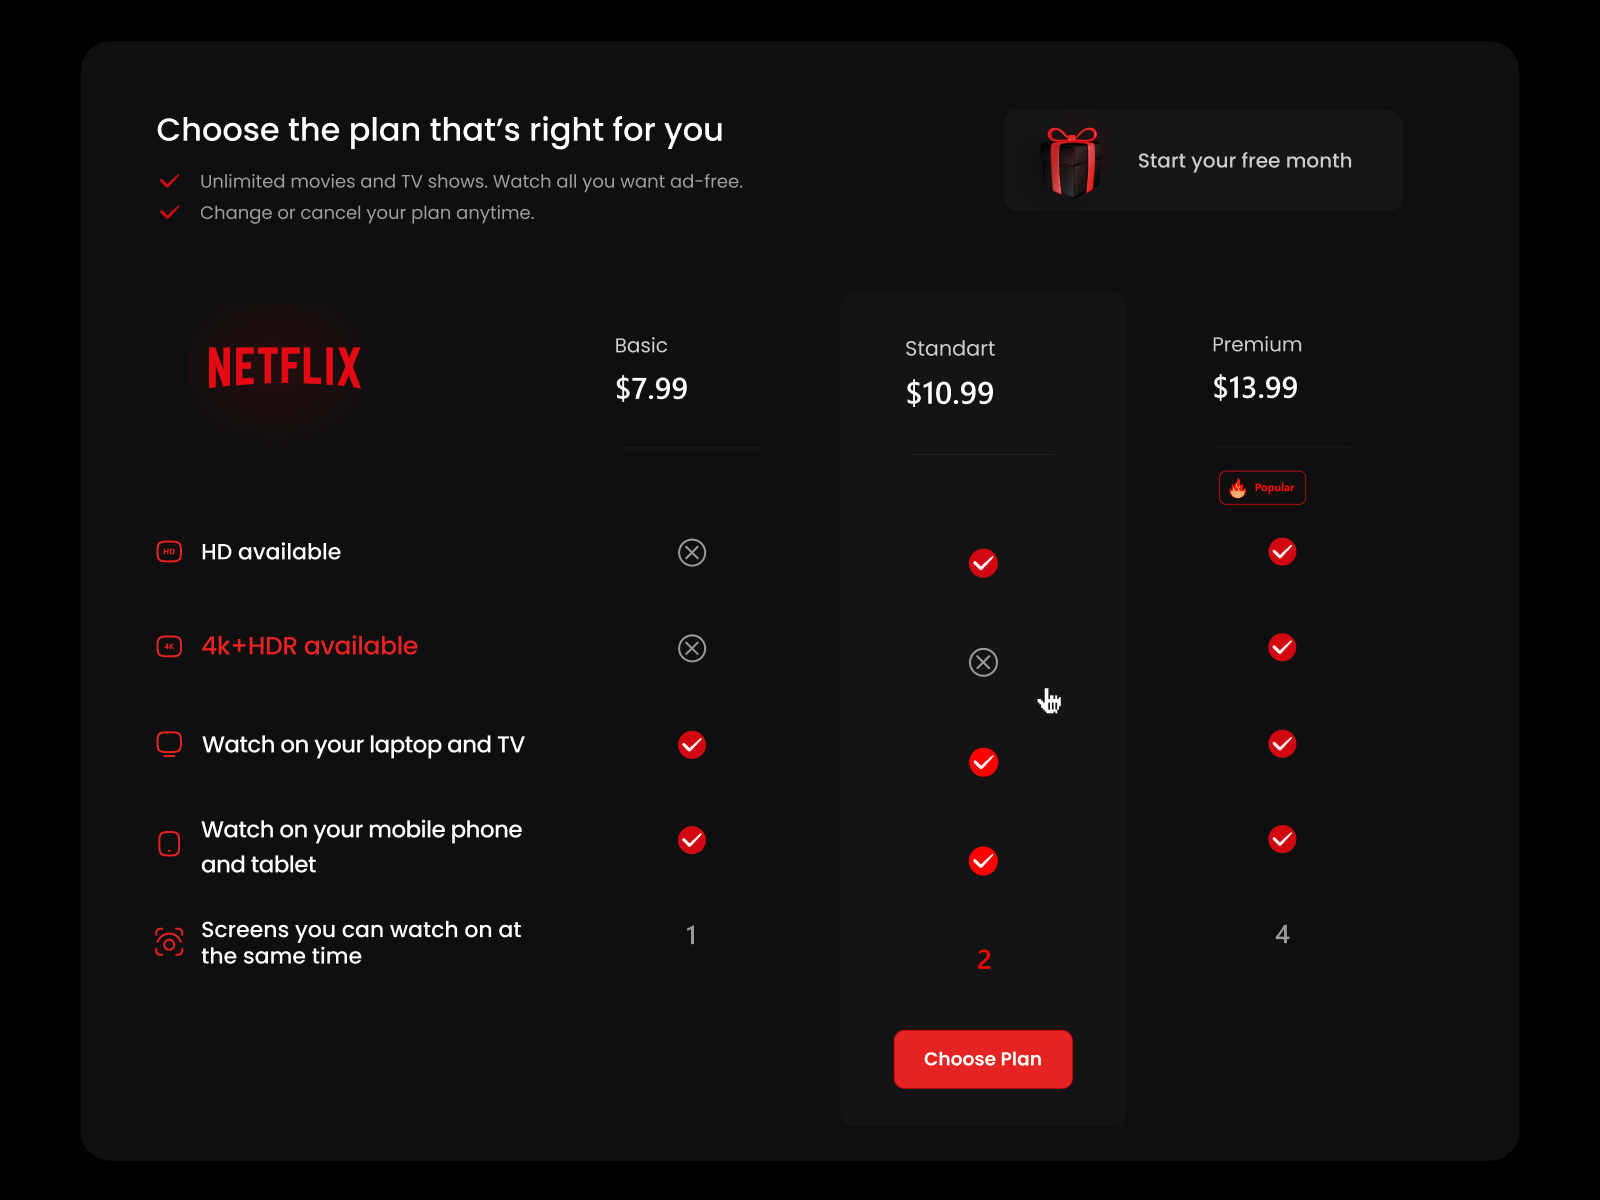 Netflix - Pricing and plans page (Redesign)